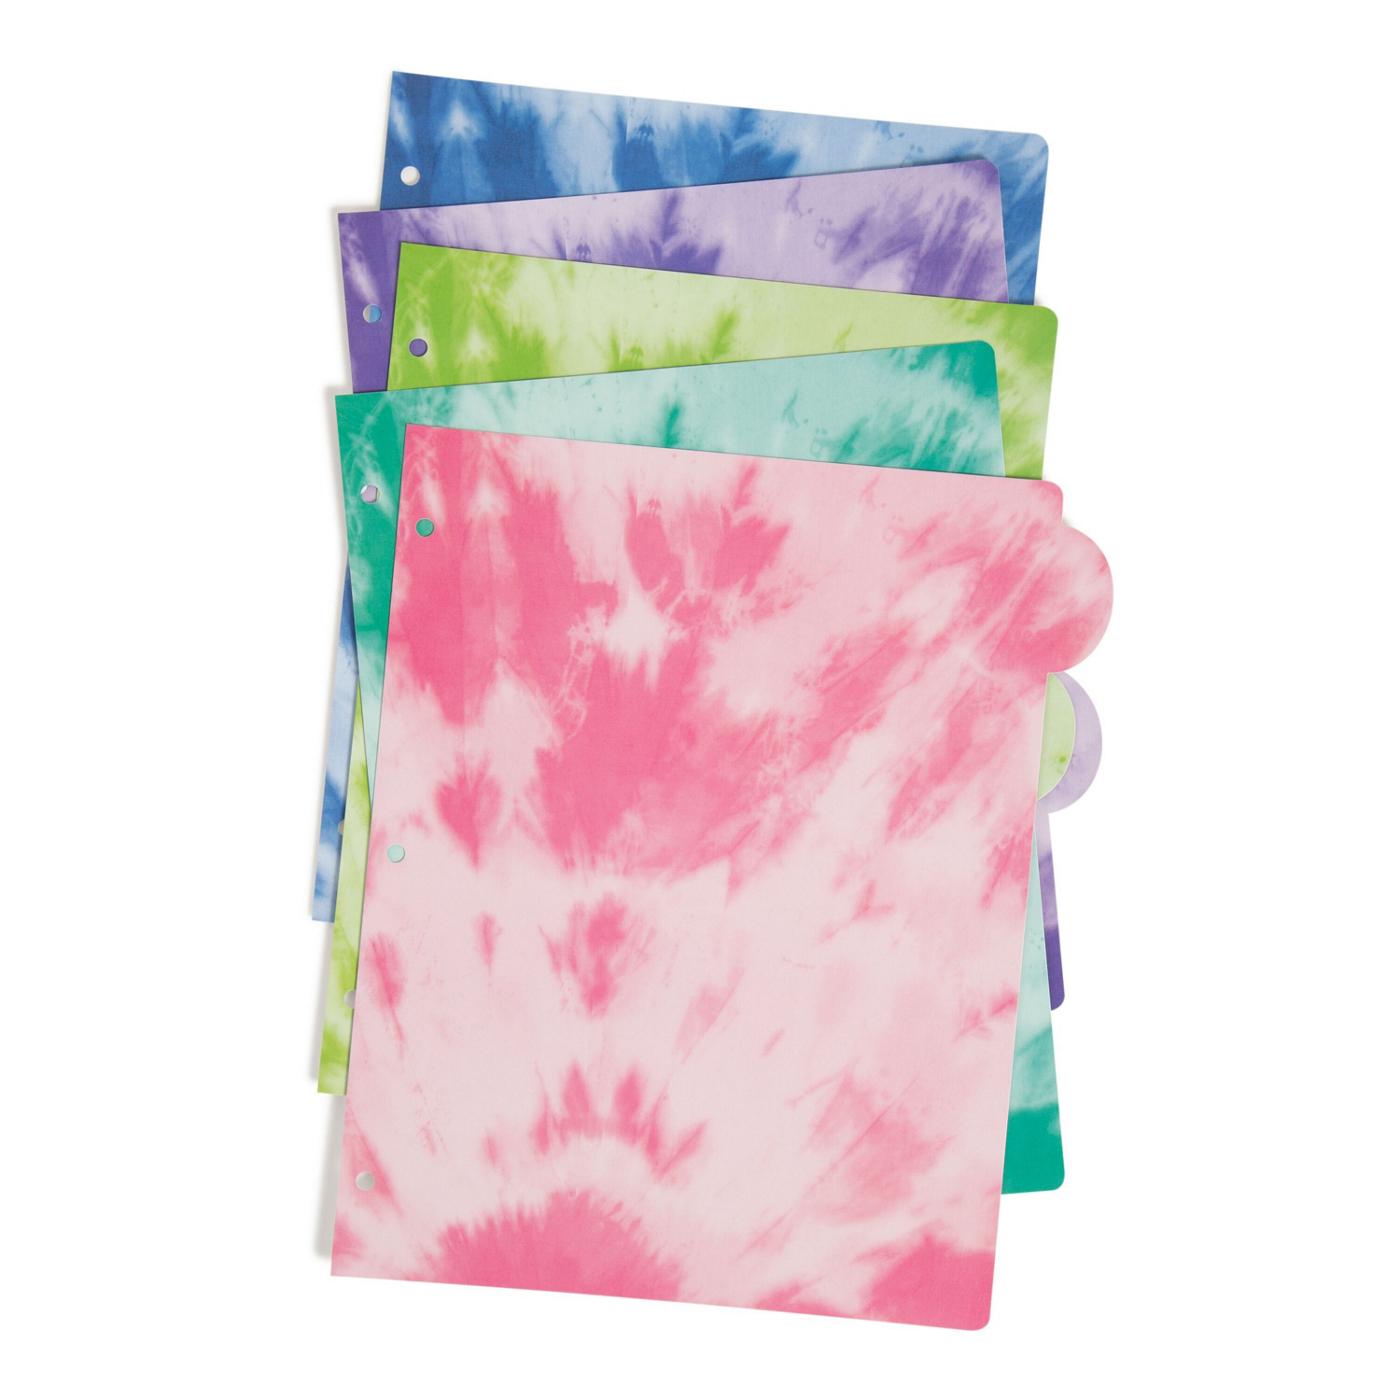 U Brands Assorted Tab Dividers - Bright Dye, 5 Ct; image 3 of 3